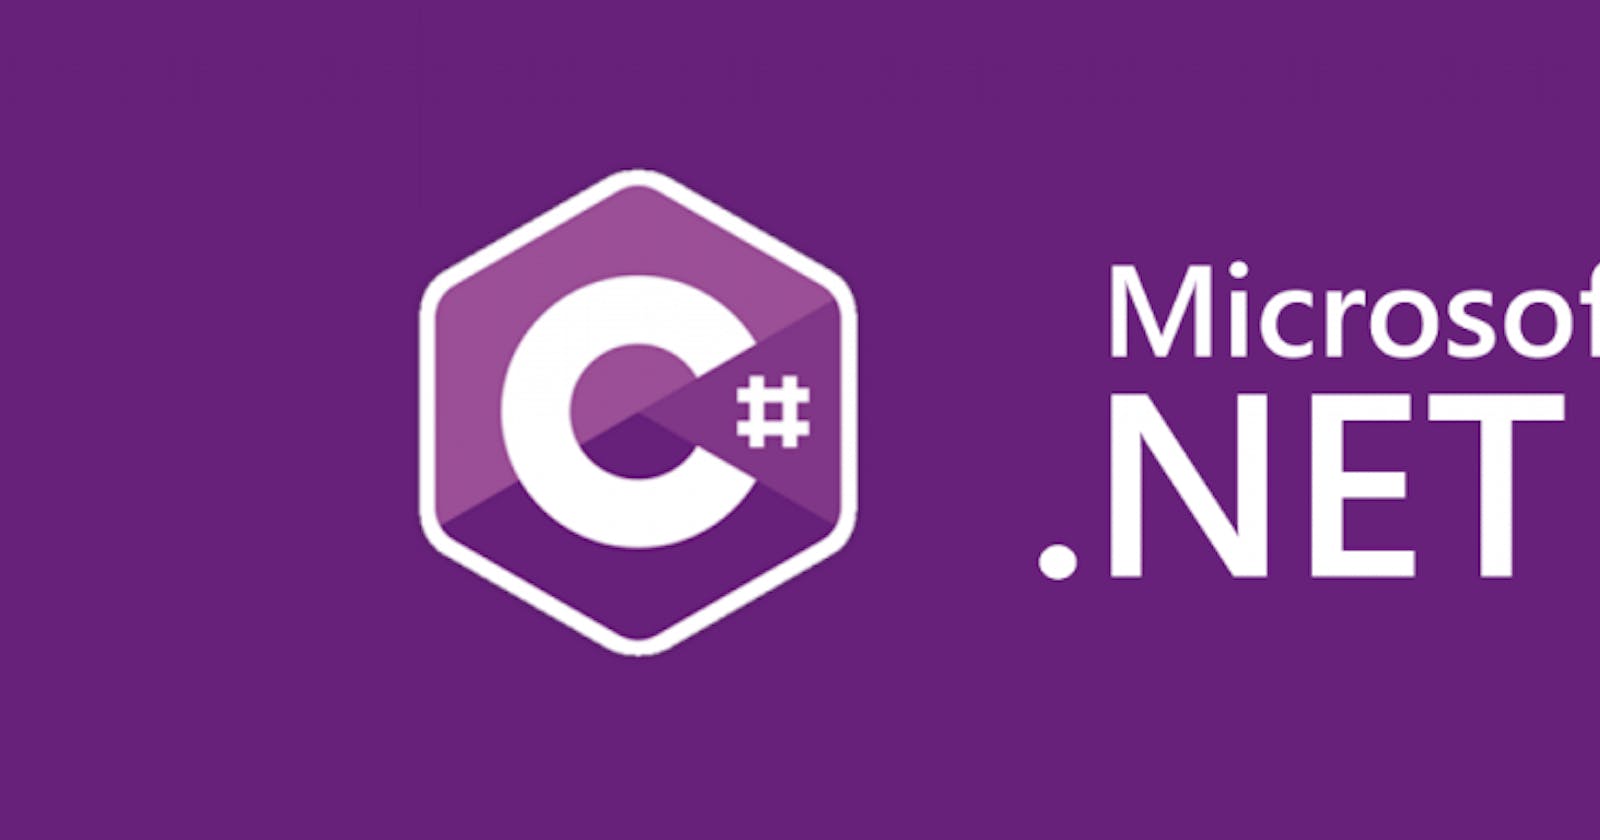 What is the difference between C# and .NET?